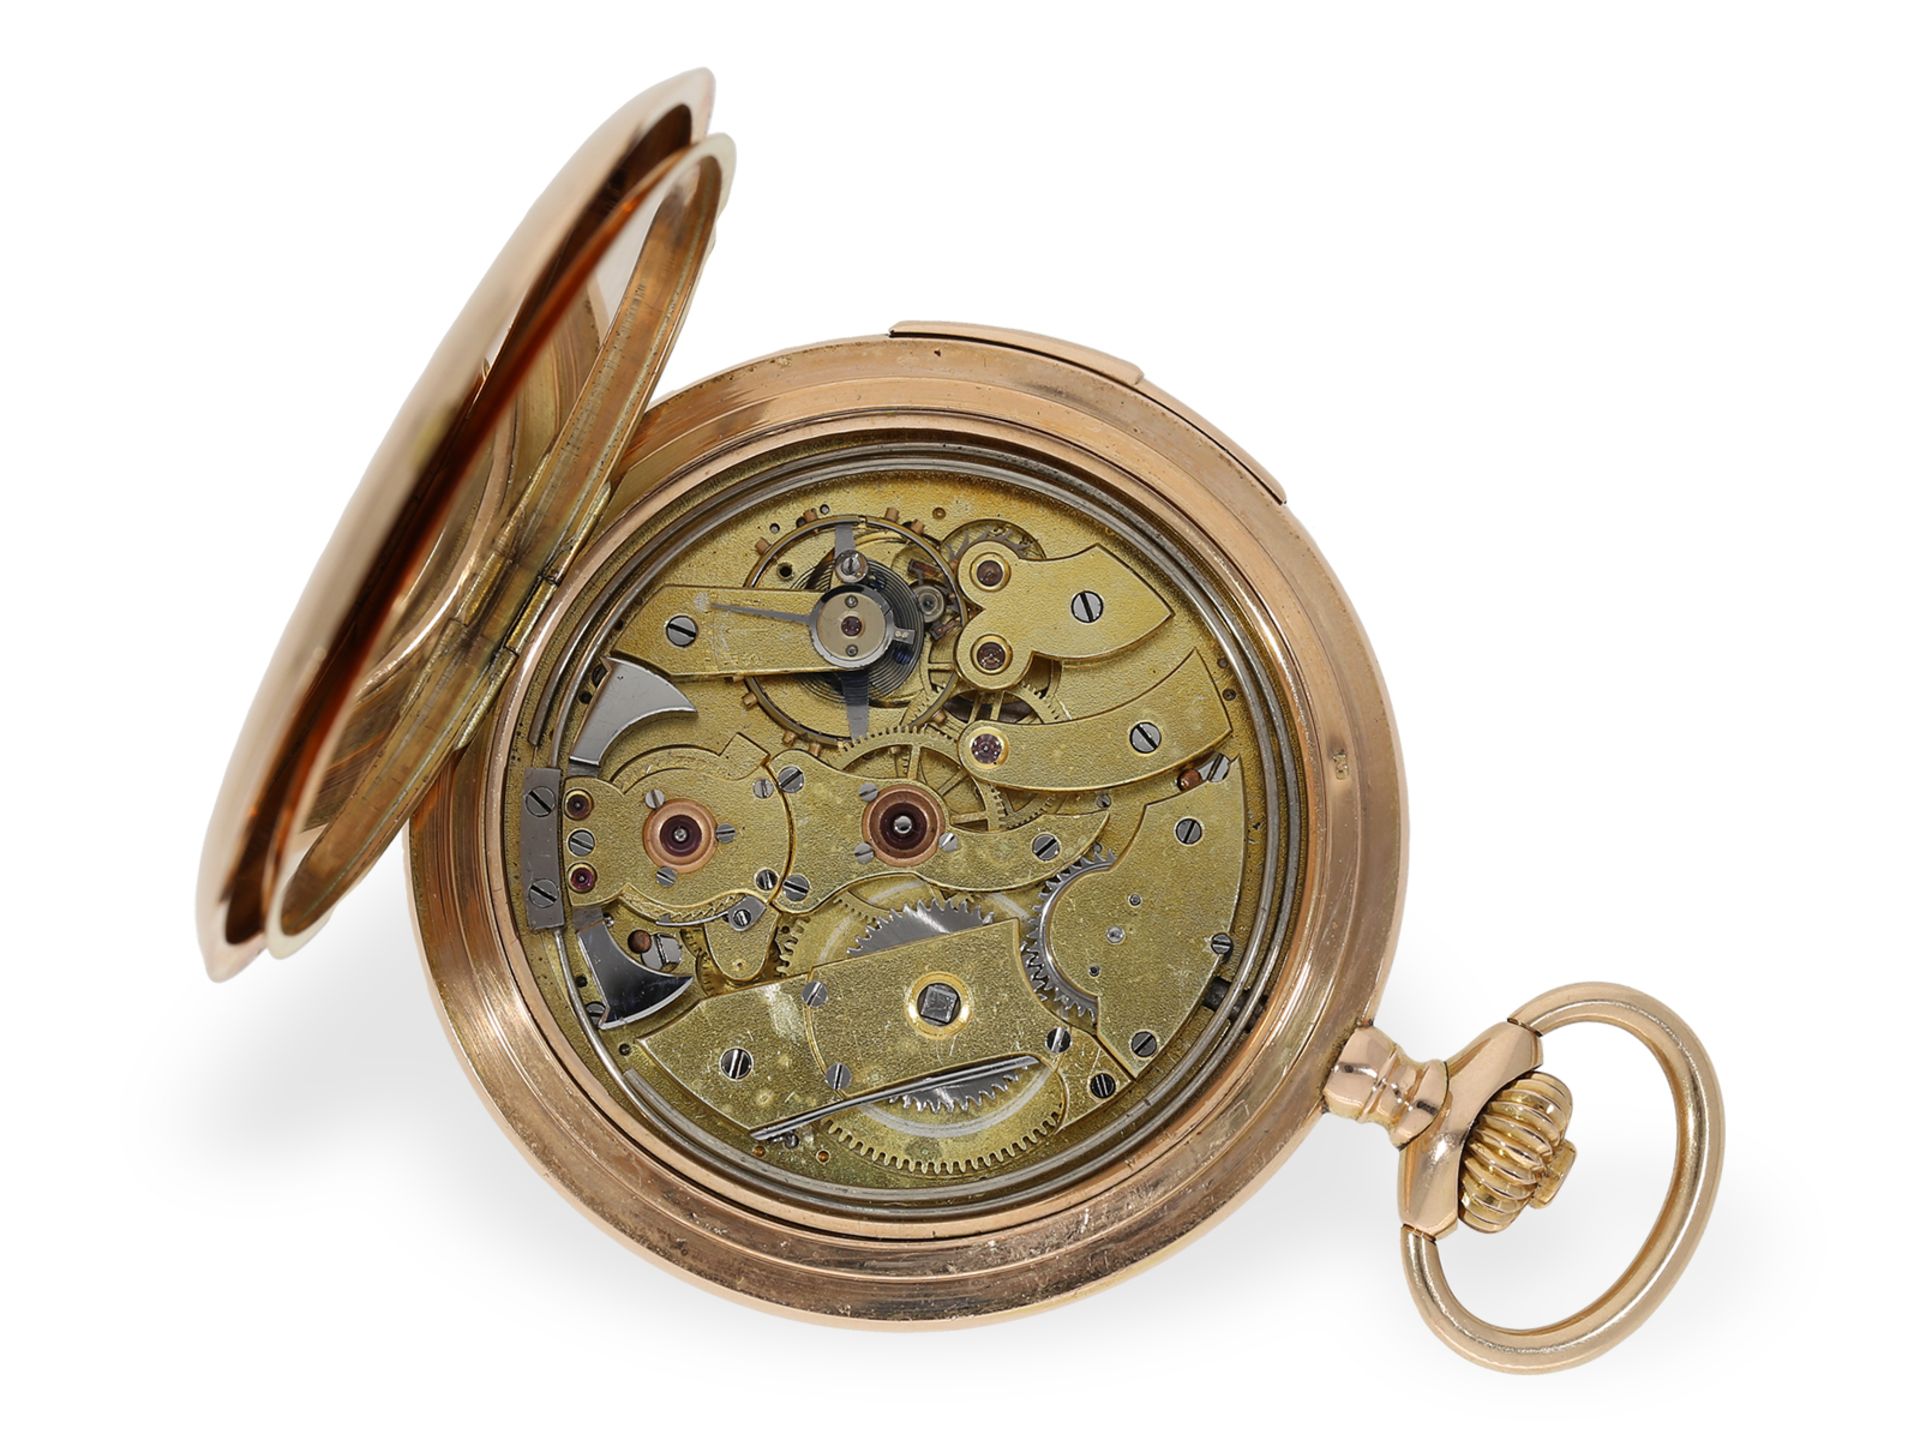 Pocket watch: very fine gold hunting case watch with quarter-hour repeater, probably Piguet calibre, - Image 2 of 6